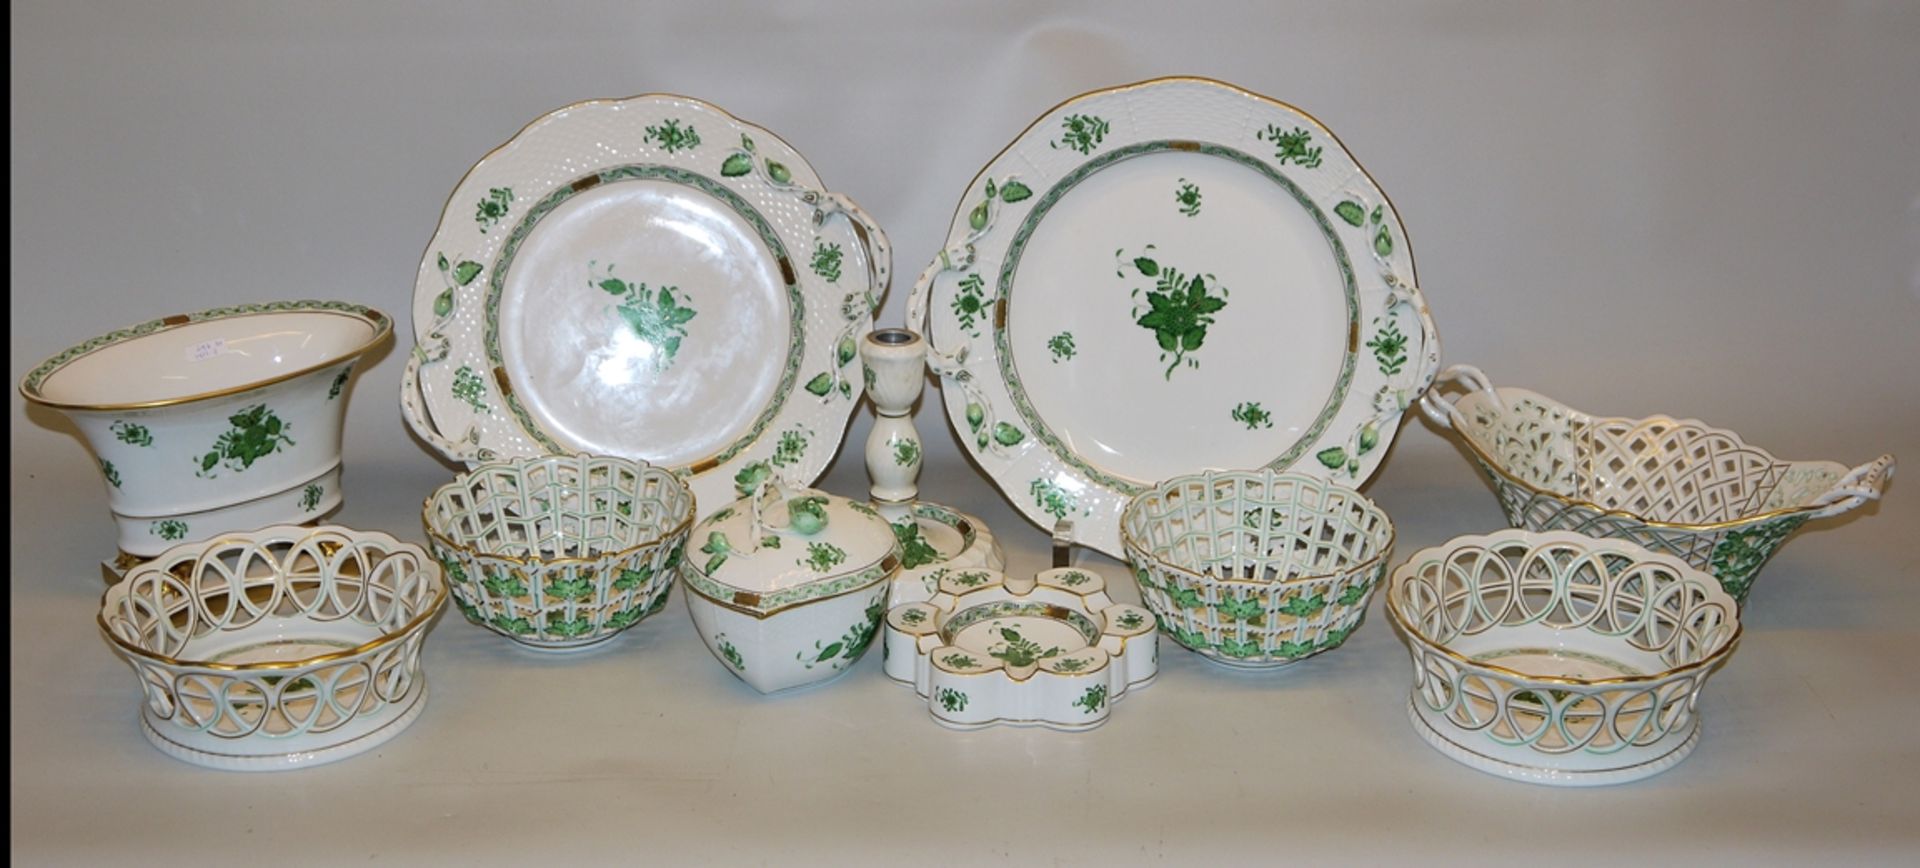 11 pieces of porcelain Apponyi Green, Herend